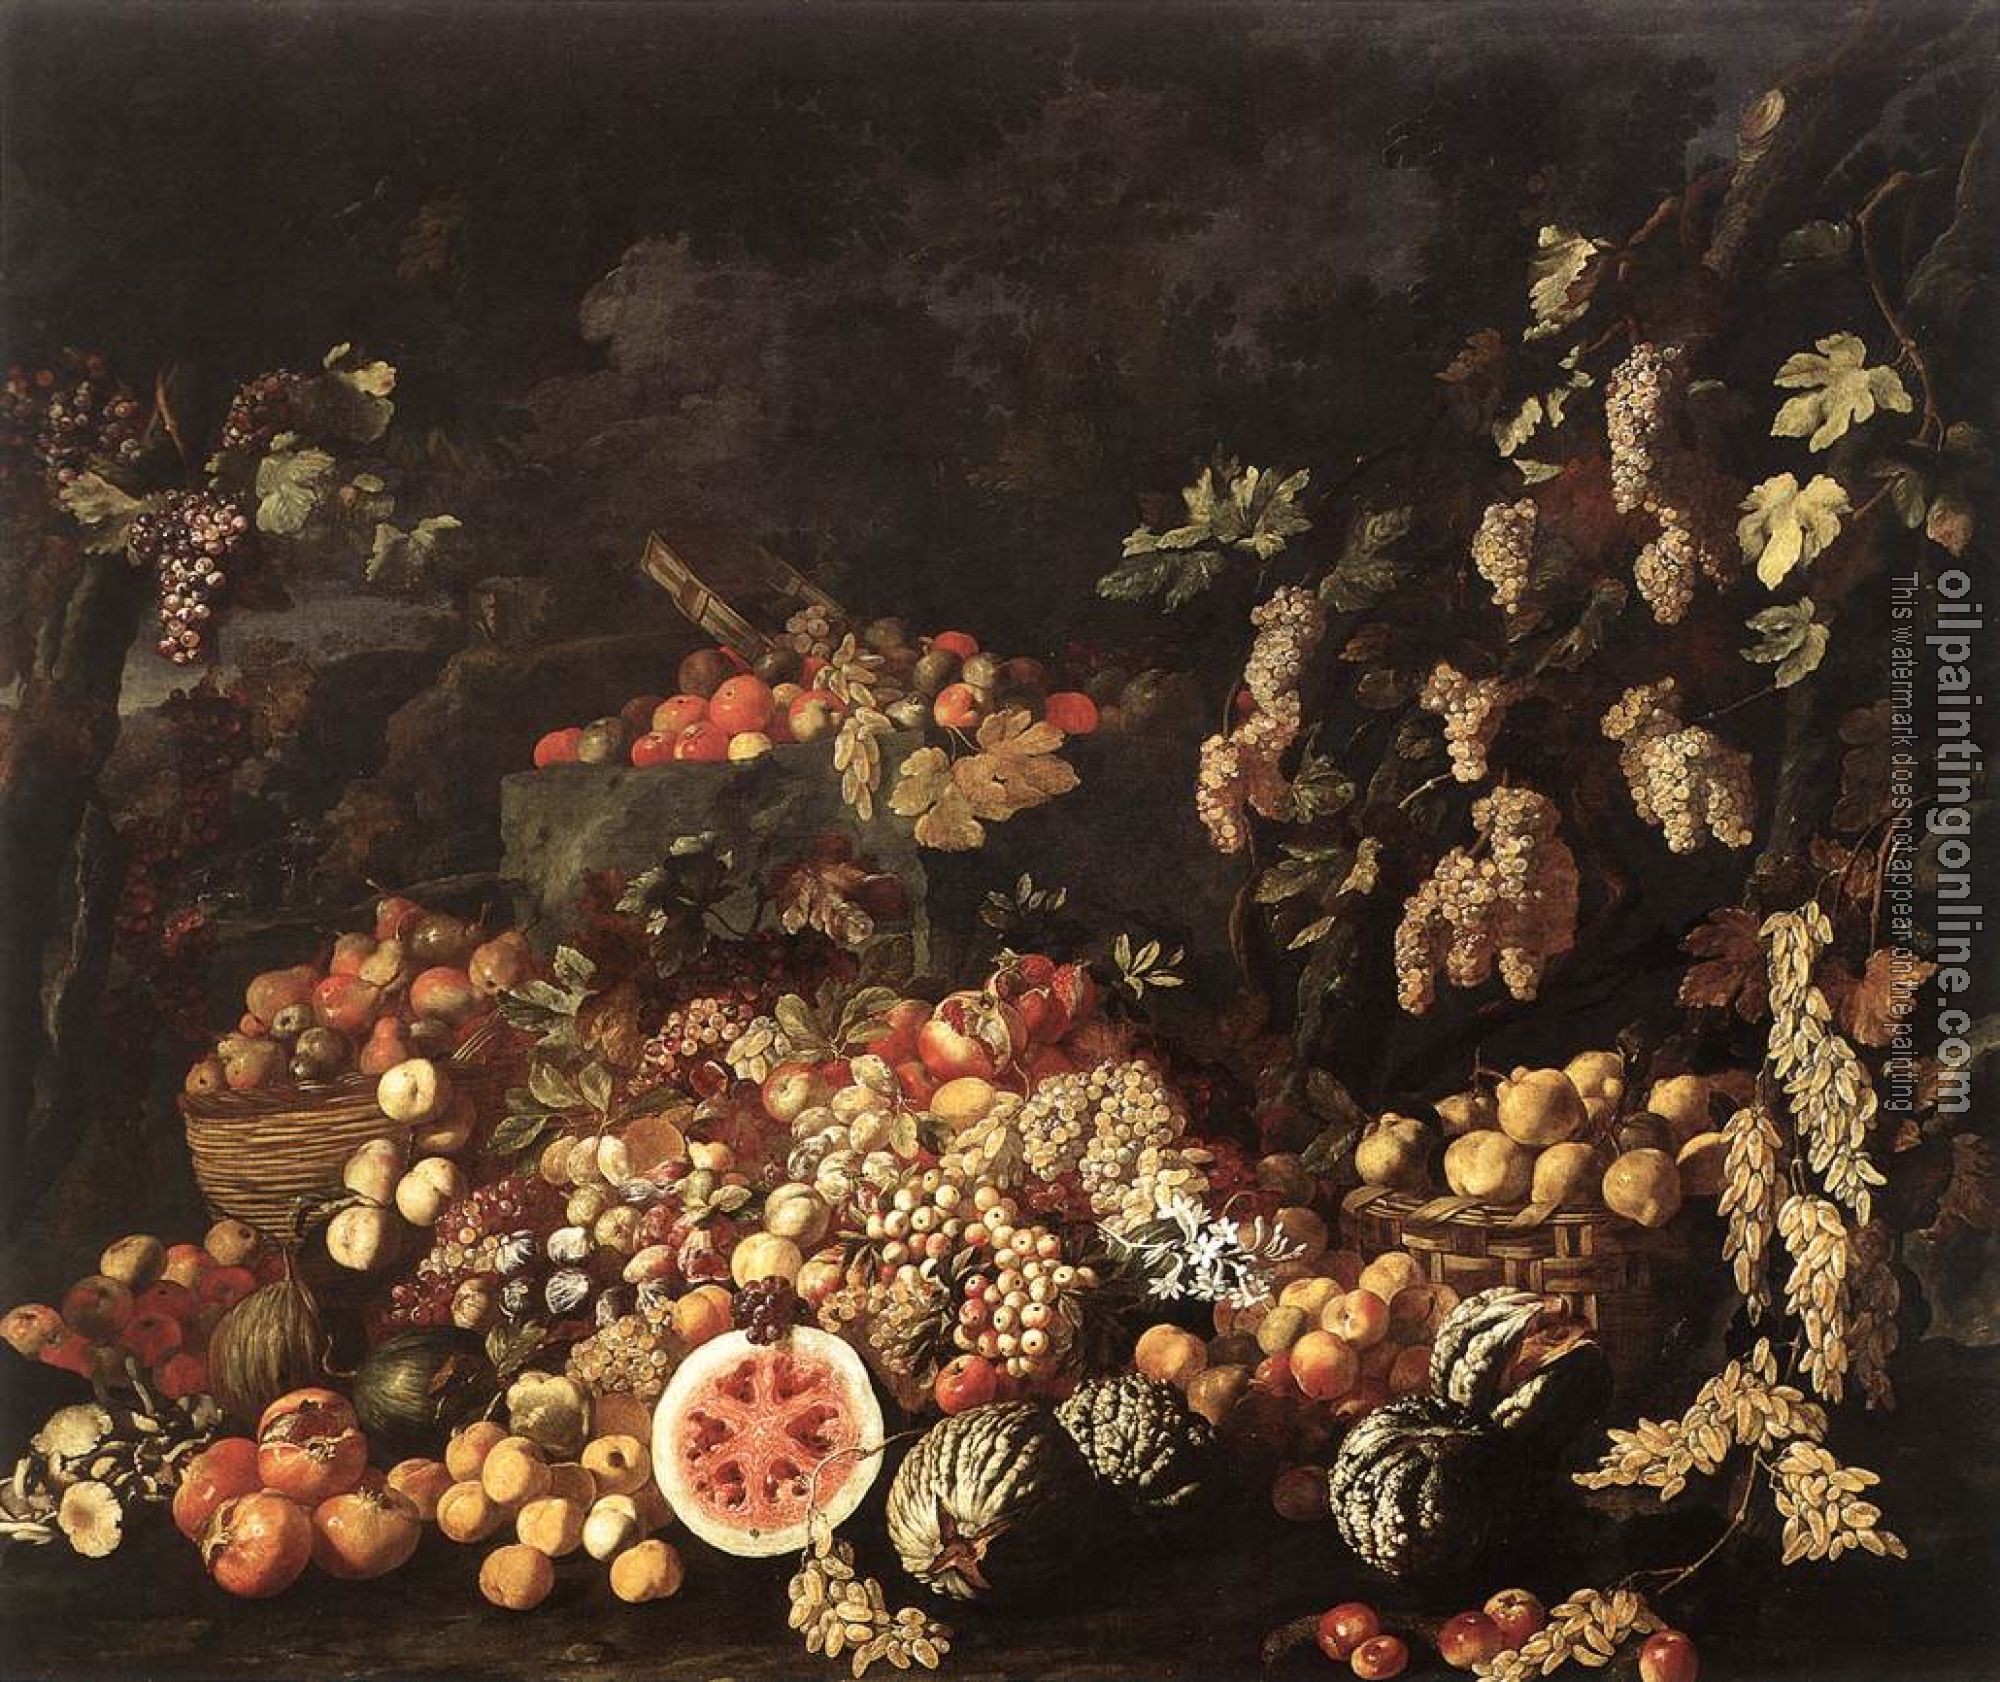 Recco, Giuseppe - Still-Life with Fruit and Flowers